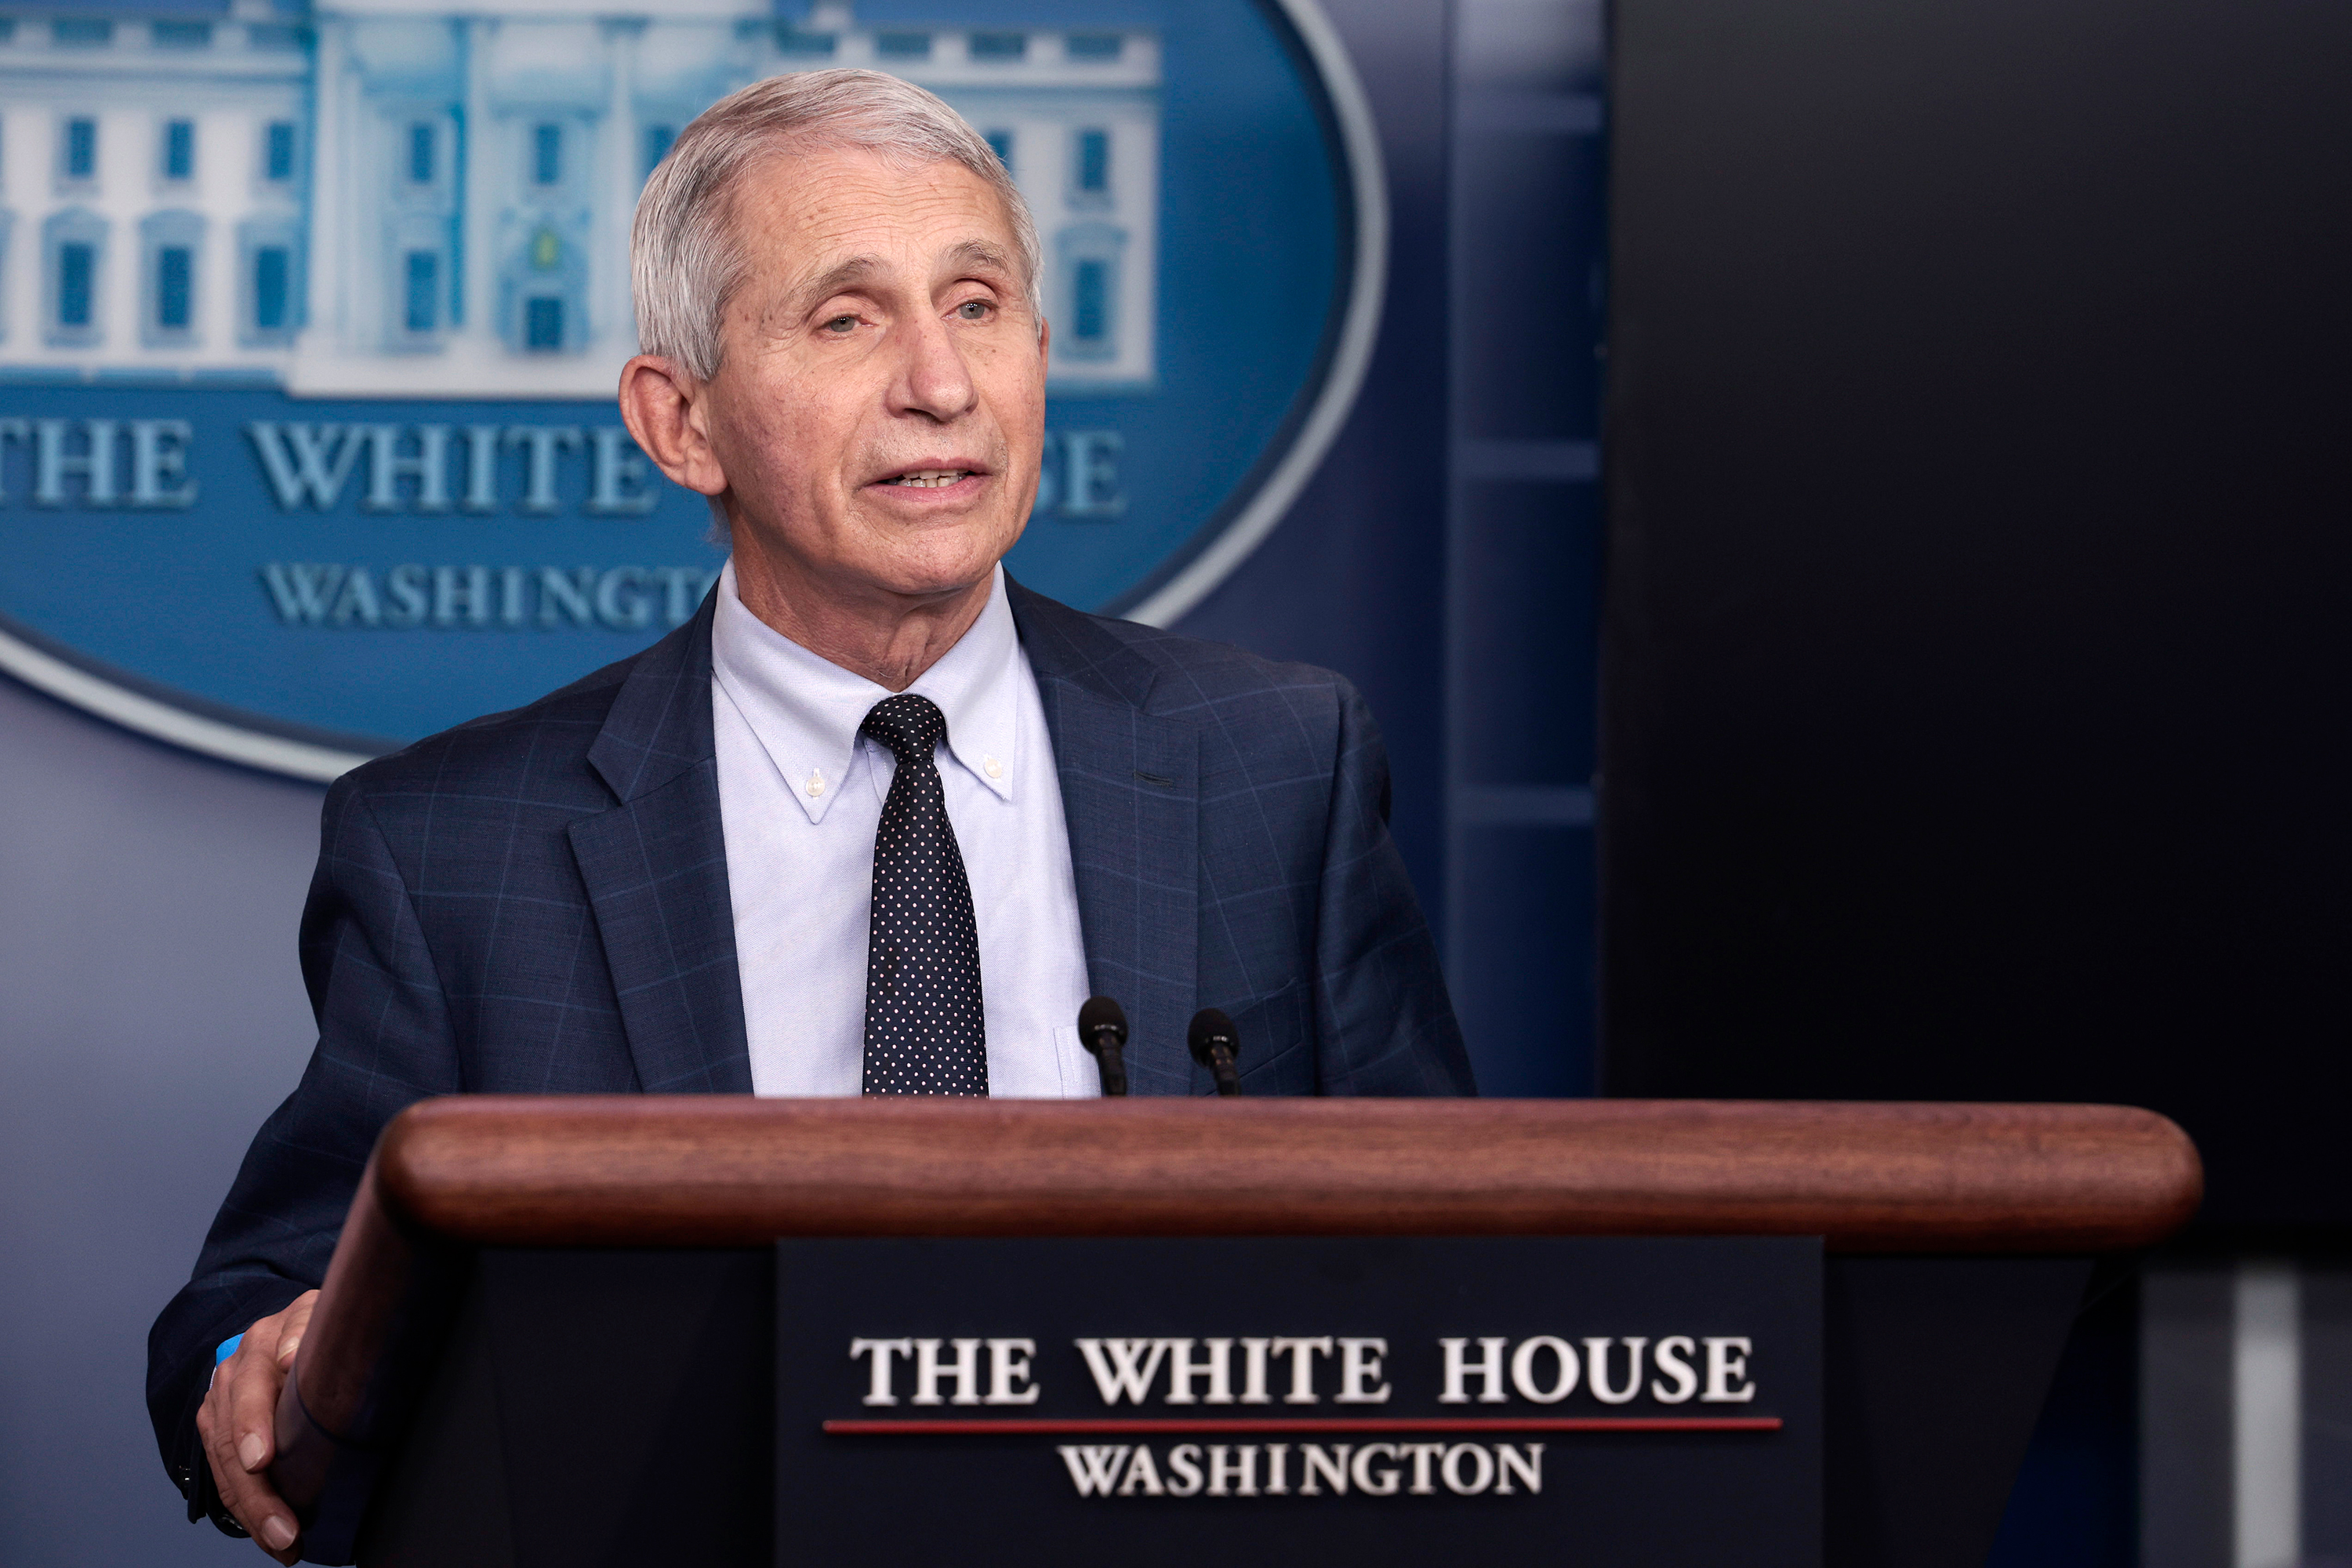 Dr. Anthony Fauci speaks during a briefing at the White House in Washington, DC, on December 1.